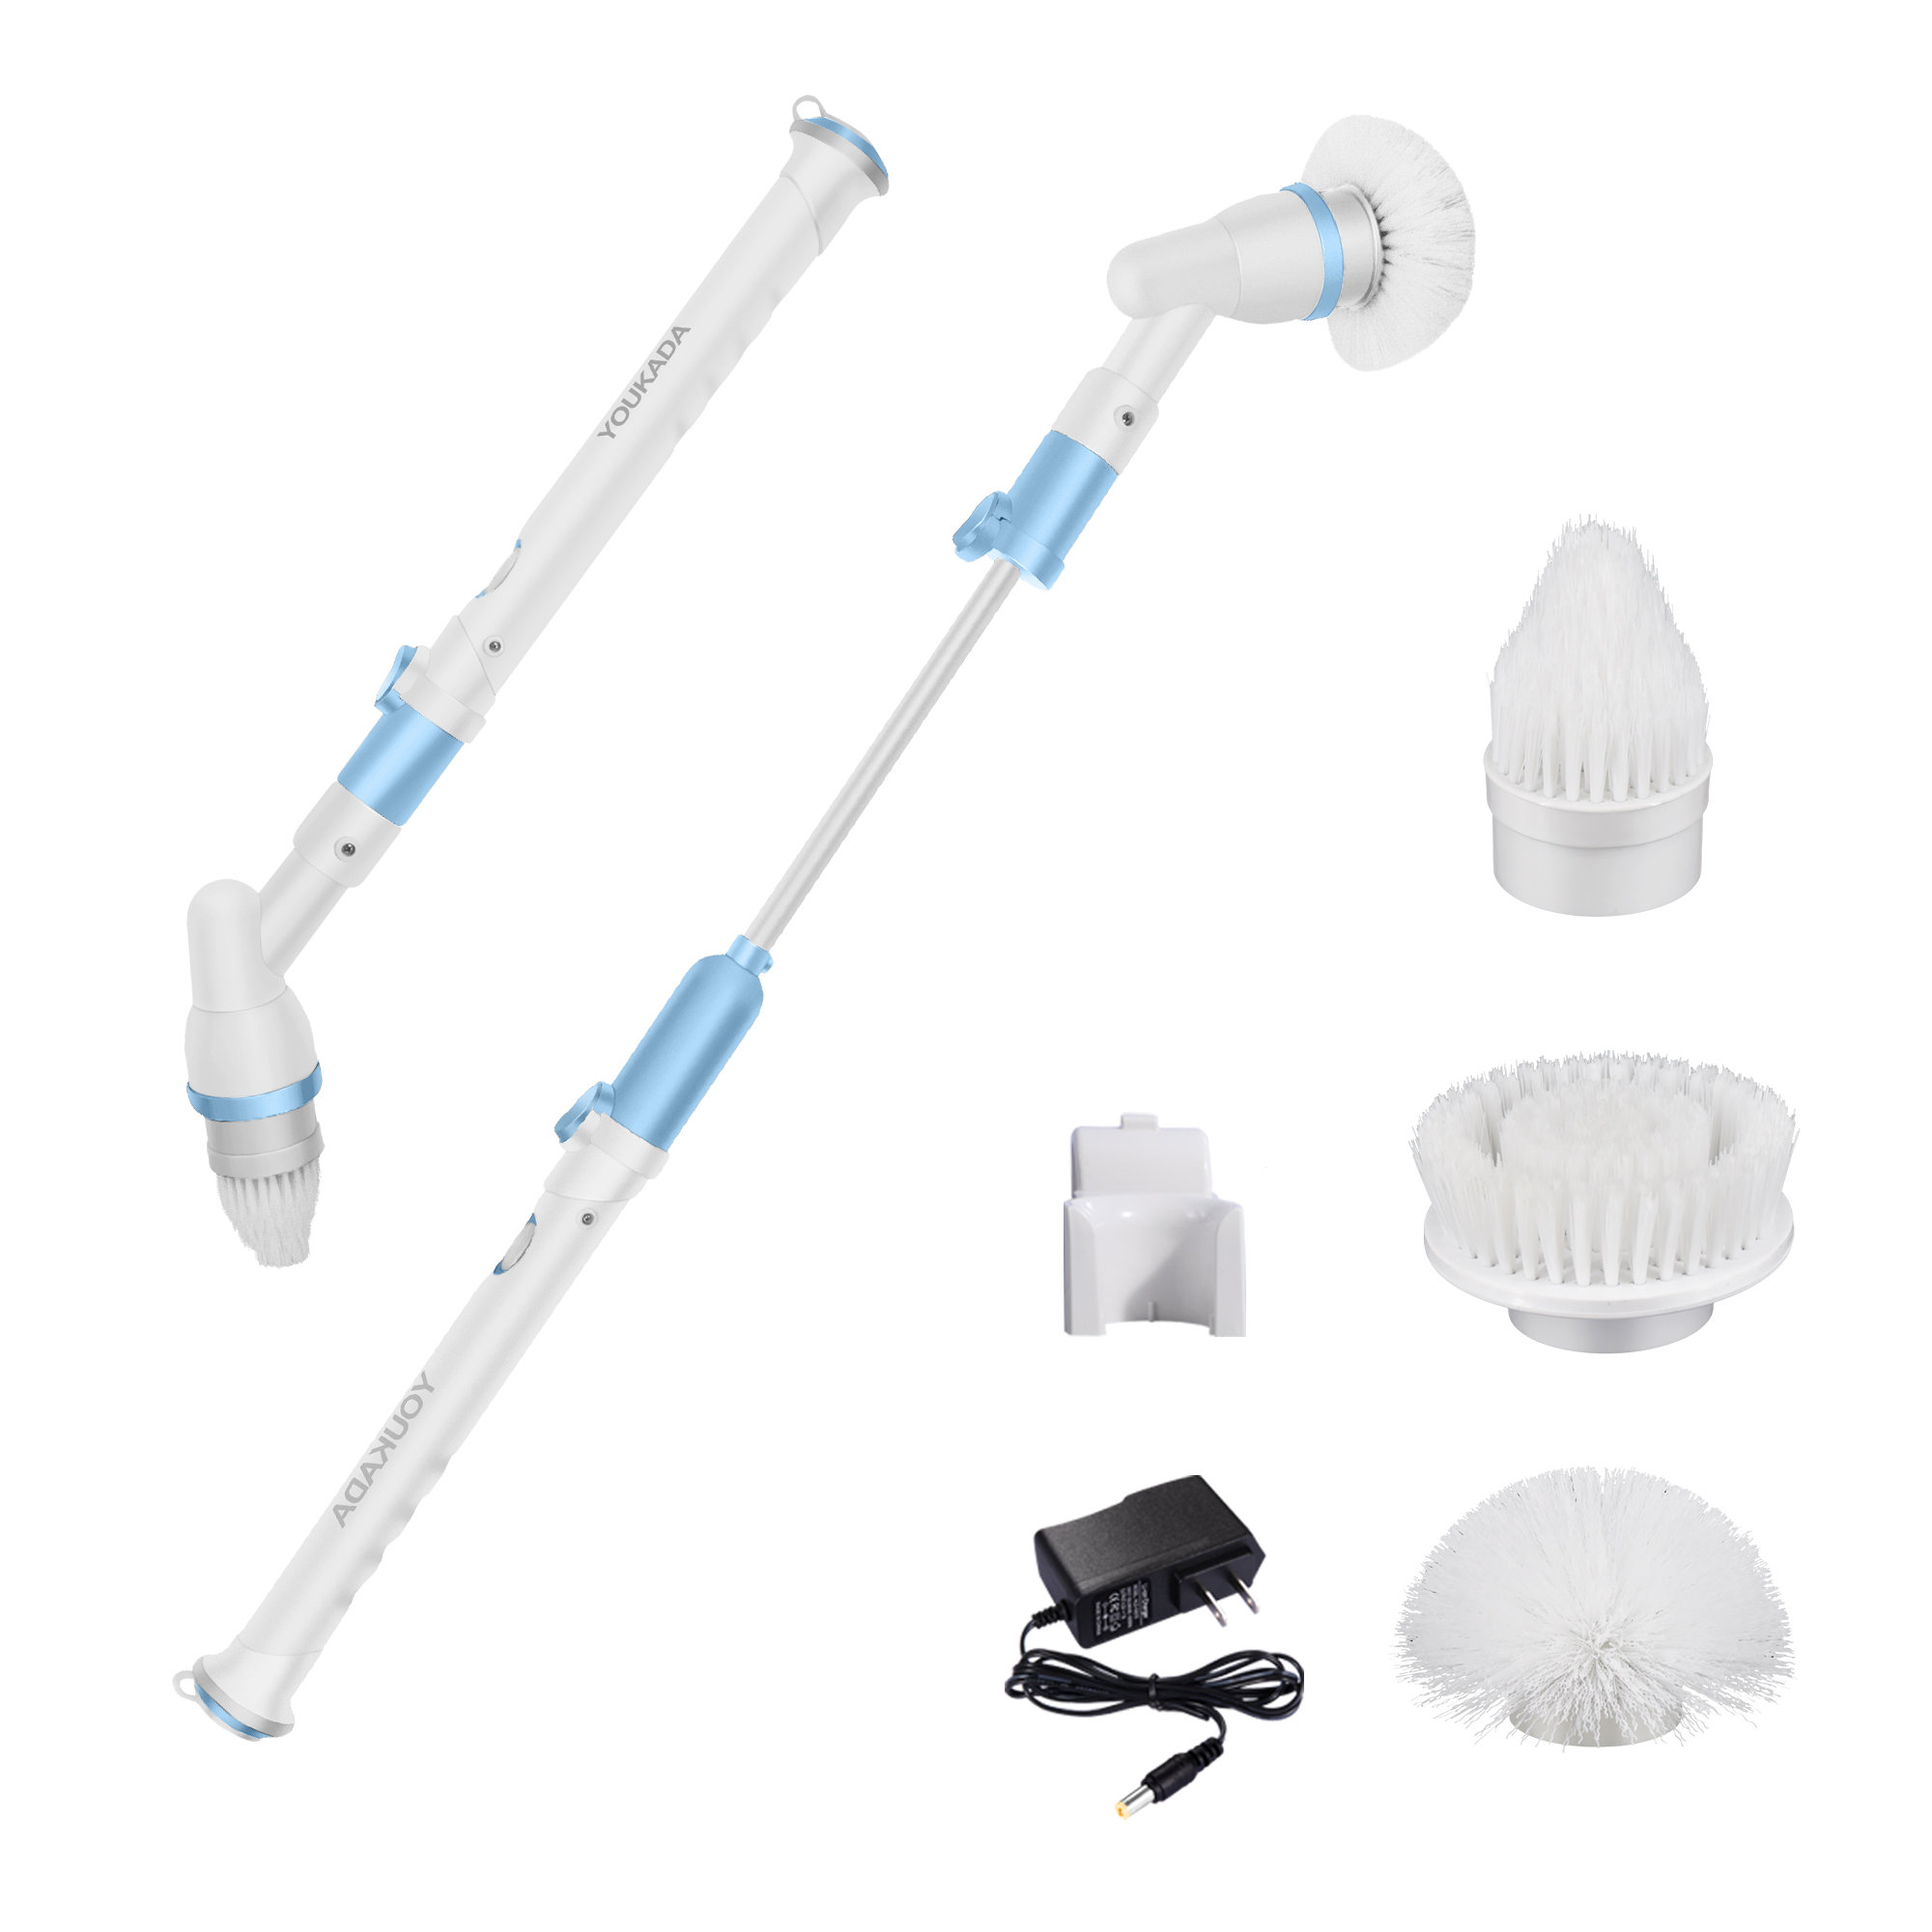 Power Spin Scrubber Electric Household Cleaning Brush Adjustable